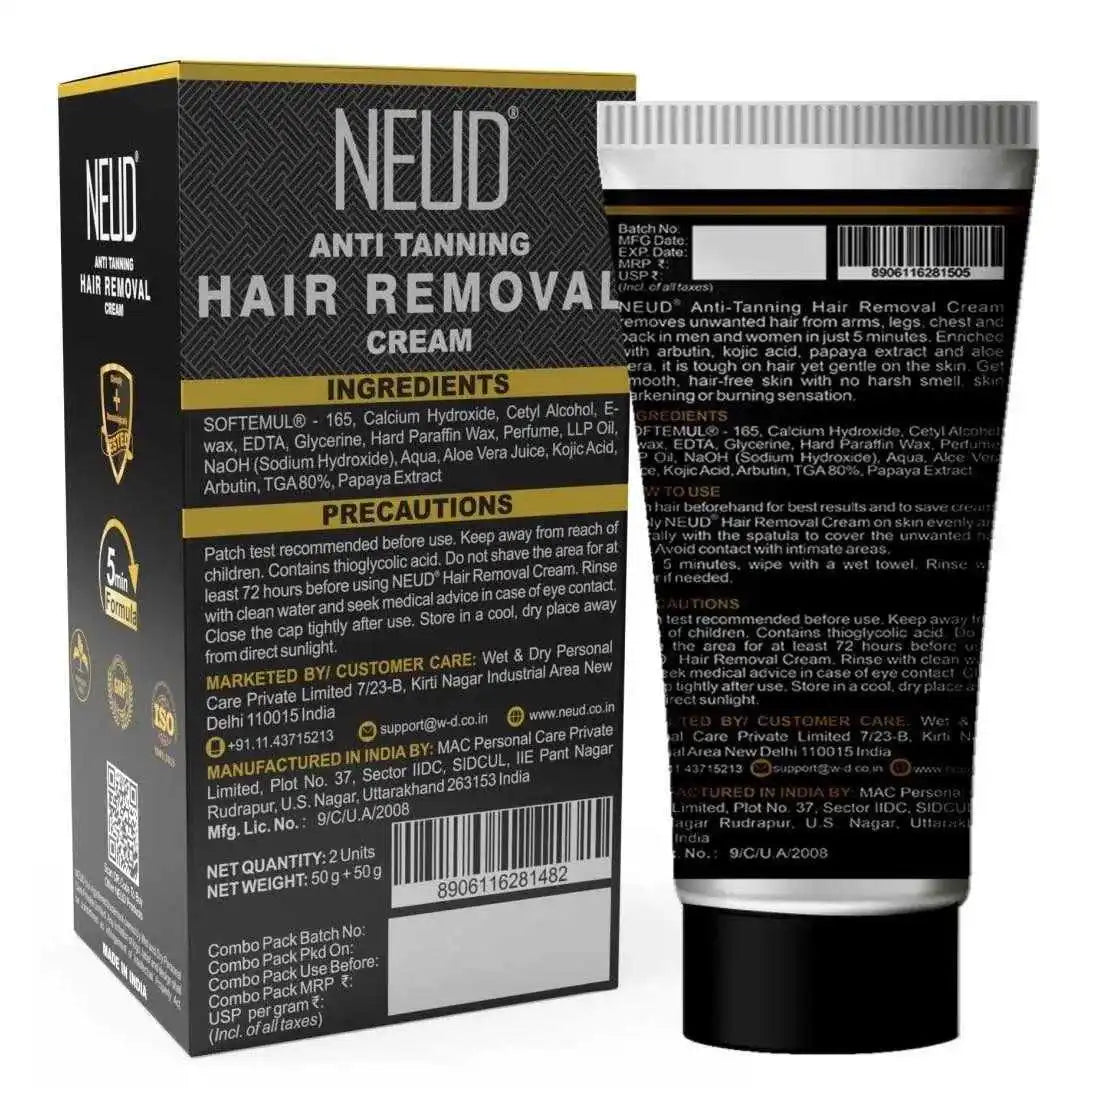 NEUD Anti-Tanning Hair Removal Cream for Arms, Legs, Chest and Back - Ingredients - everteen-neud.com